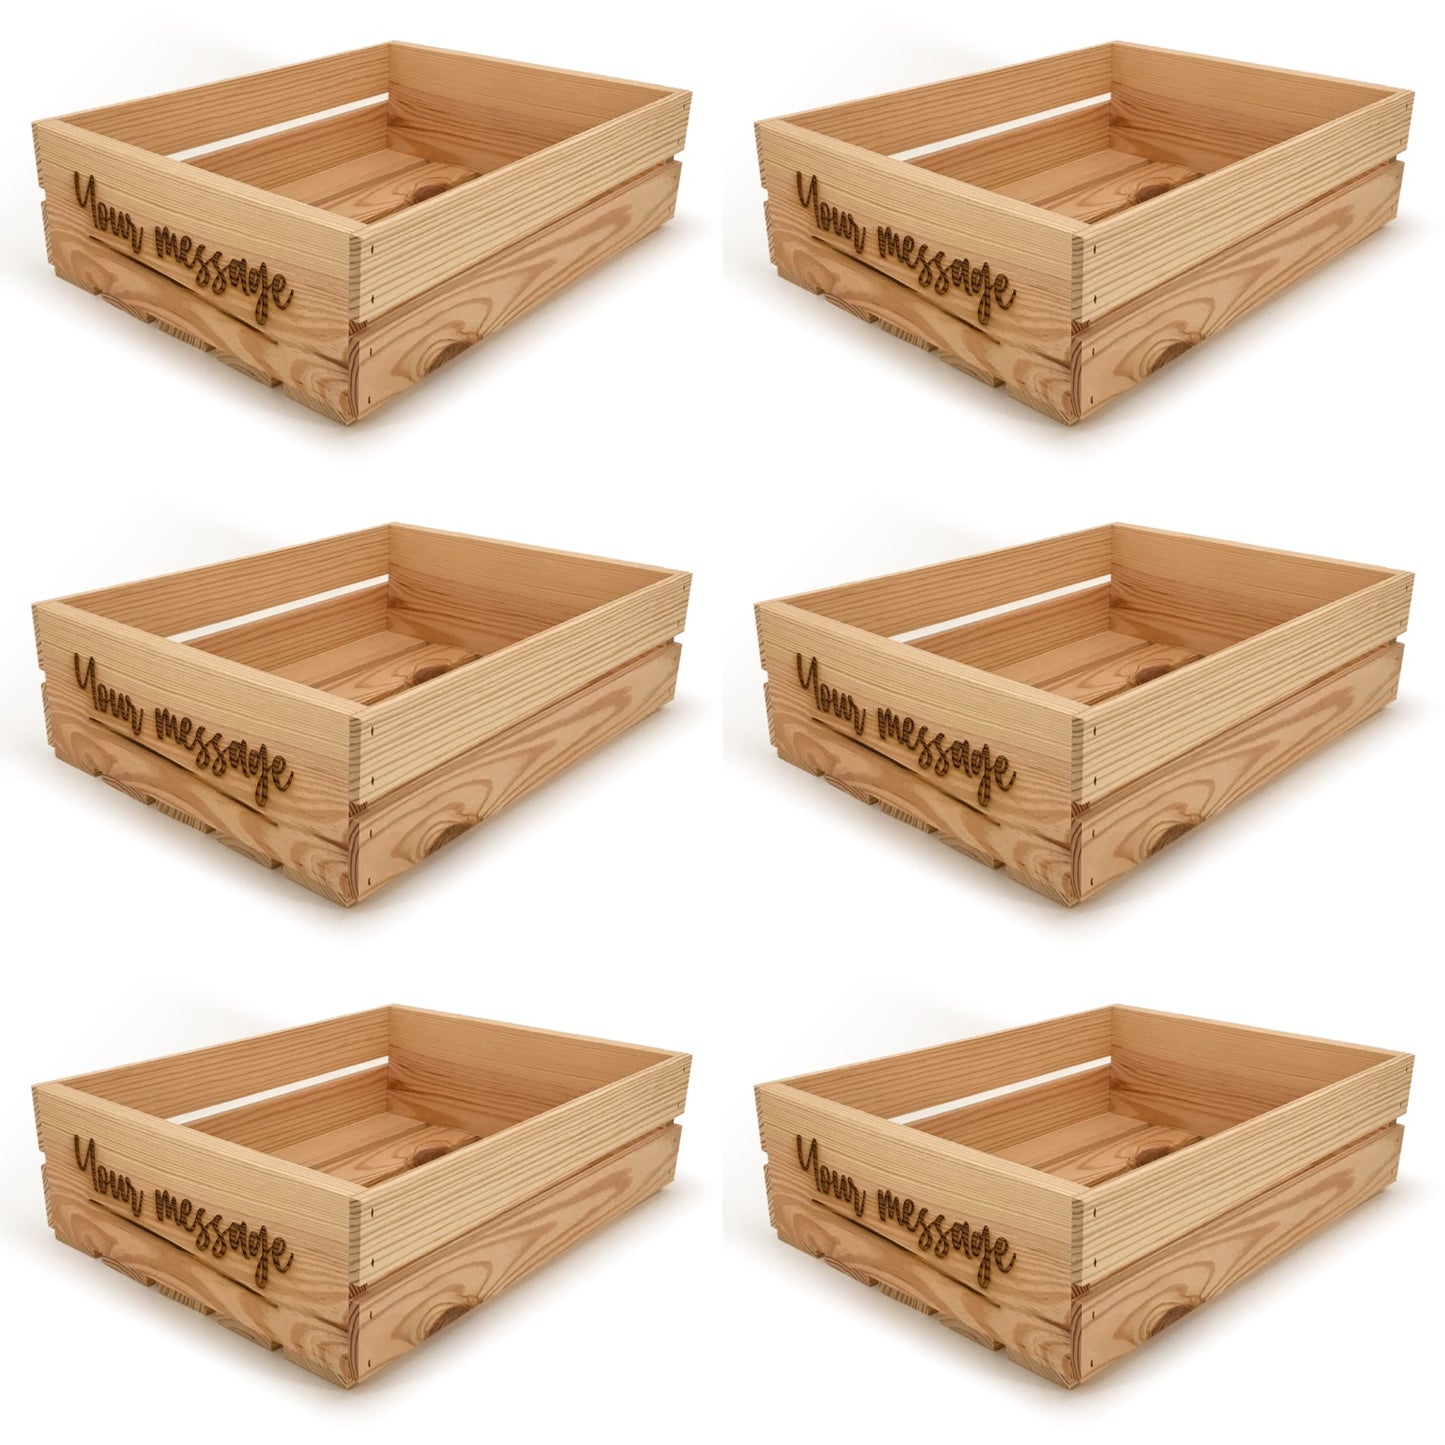 6 Small wooden crates with custom message 18x14x5.25, 6-WS-18-14-5.25-ST-NW-NL, 12-WS-18-14-5.25-ST-NW-NL, 24-WS-18-14-5.25-ST-NW-NL, 48-WS-18-14-5.25-ST-NW-NL, 96-WS-18-14-5.25-ST-NW-NL